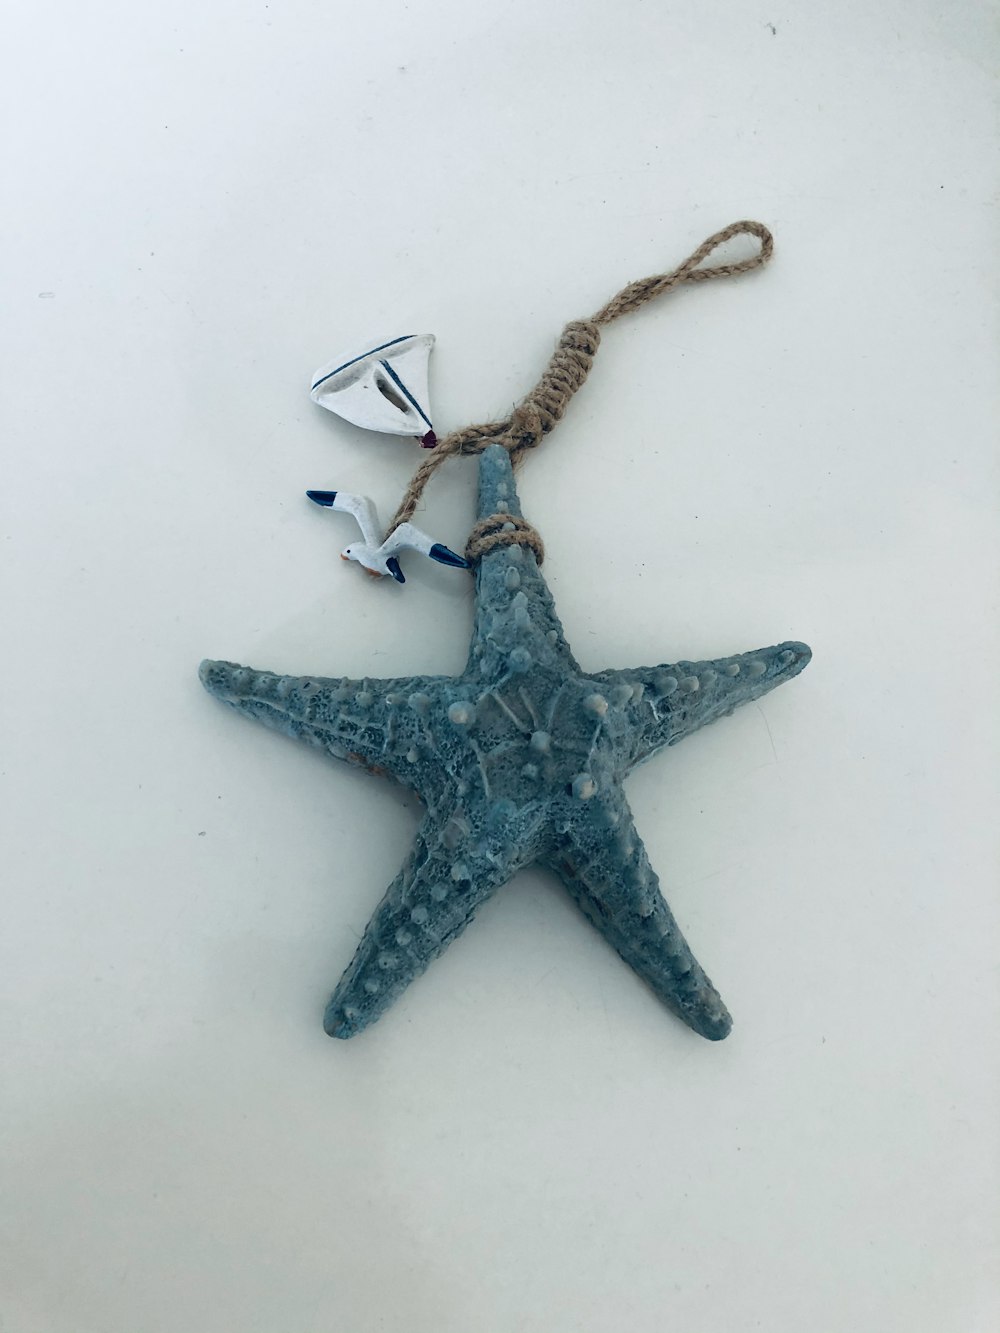 silver star pendant necklace on white surface